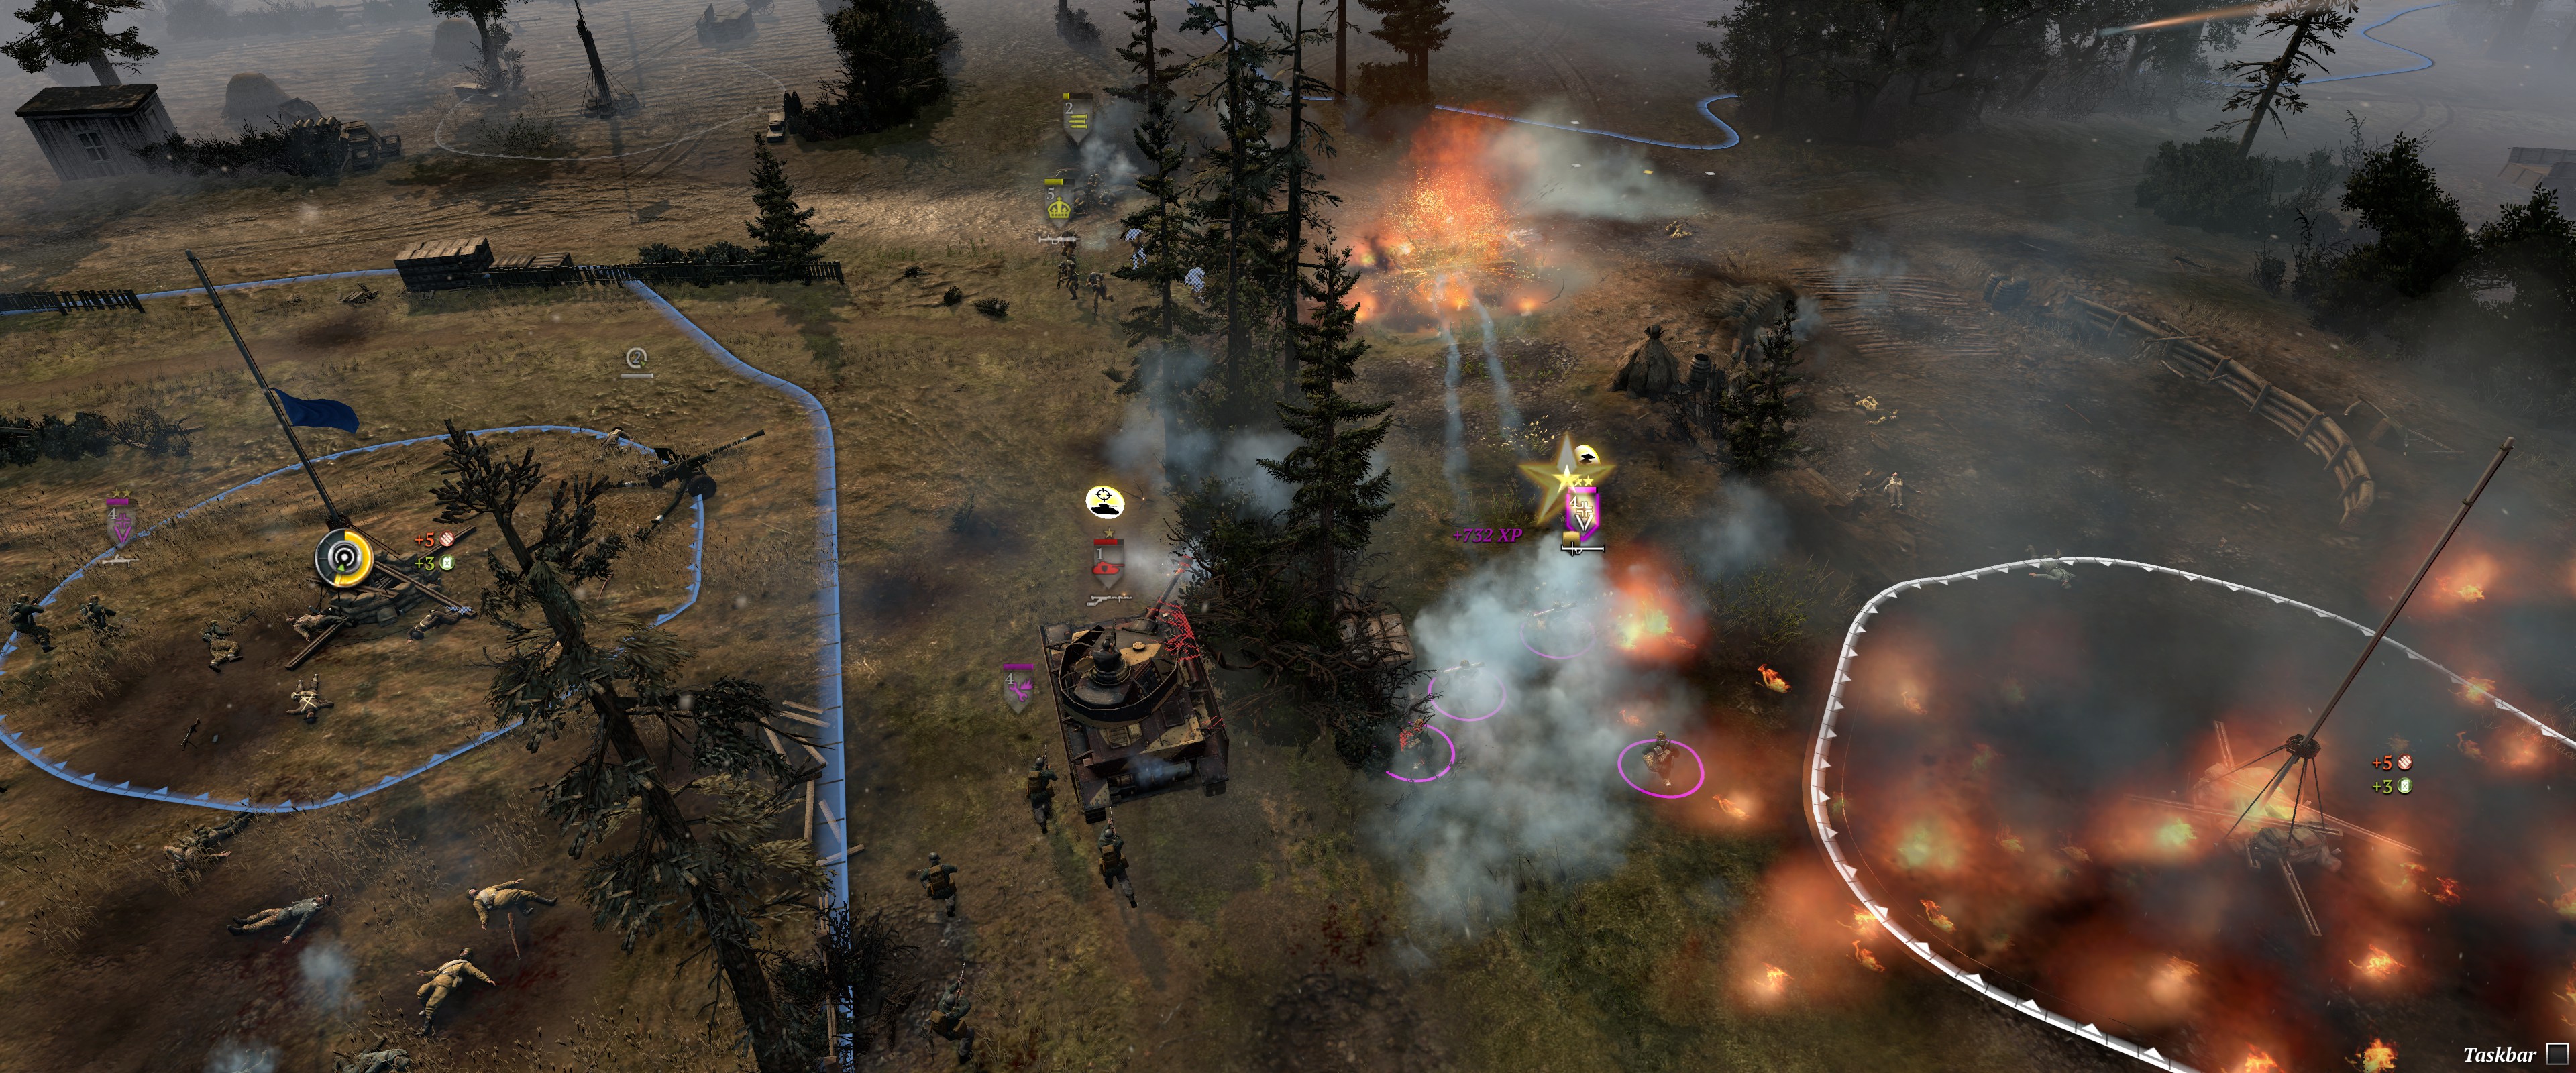 Company of Heroes 2 - Low Casualty Wehrmacht Doctrine (Team Only) - Coordinated Teamplay - 6CE84E0